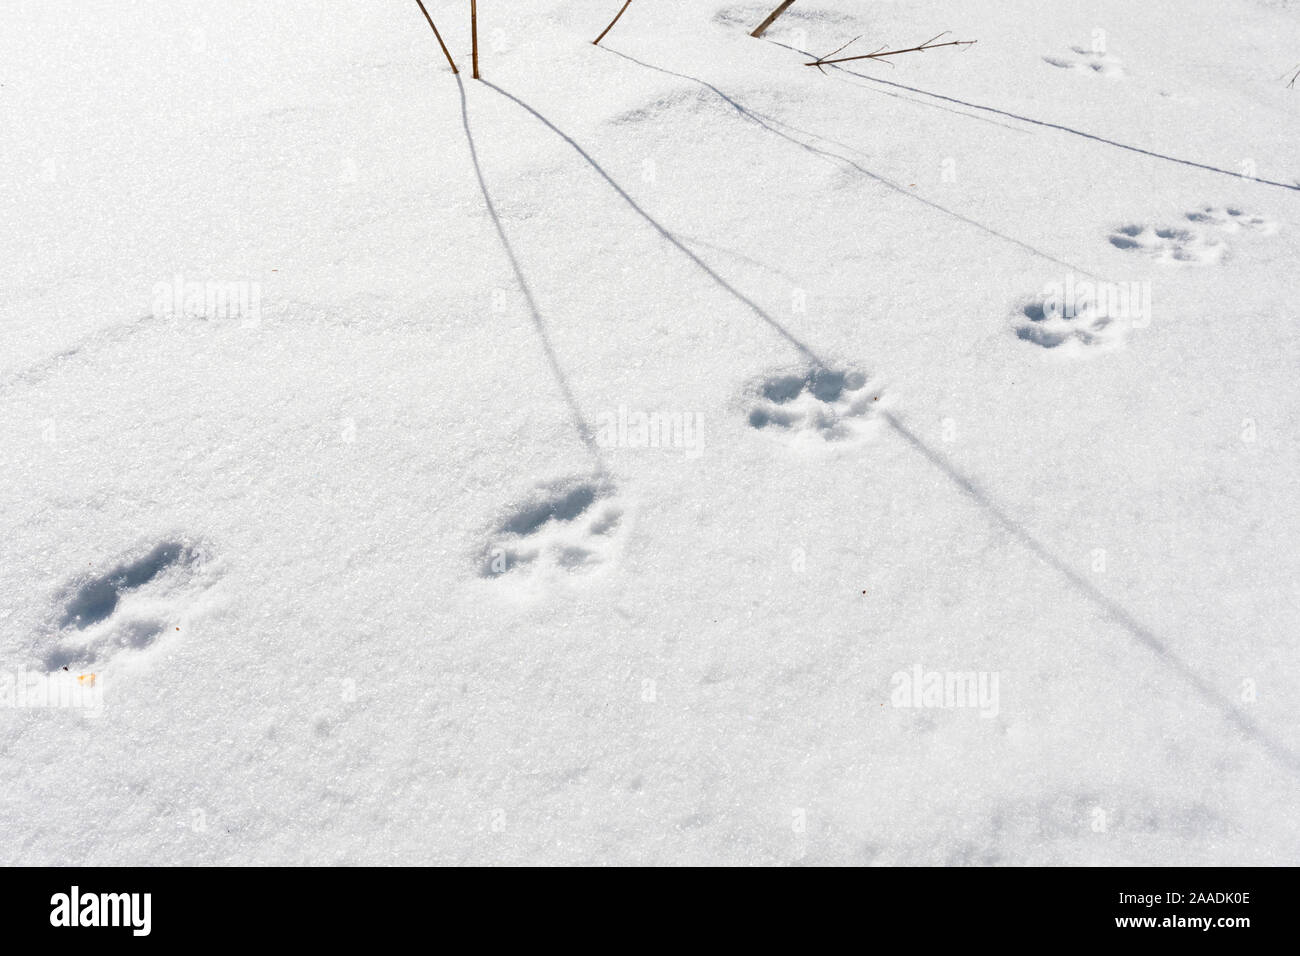 Wild Apennine wolf (Canis lupus italicus) tracks in snow. Central Apennines, Abruzzo, Italy. February. Stock Photo